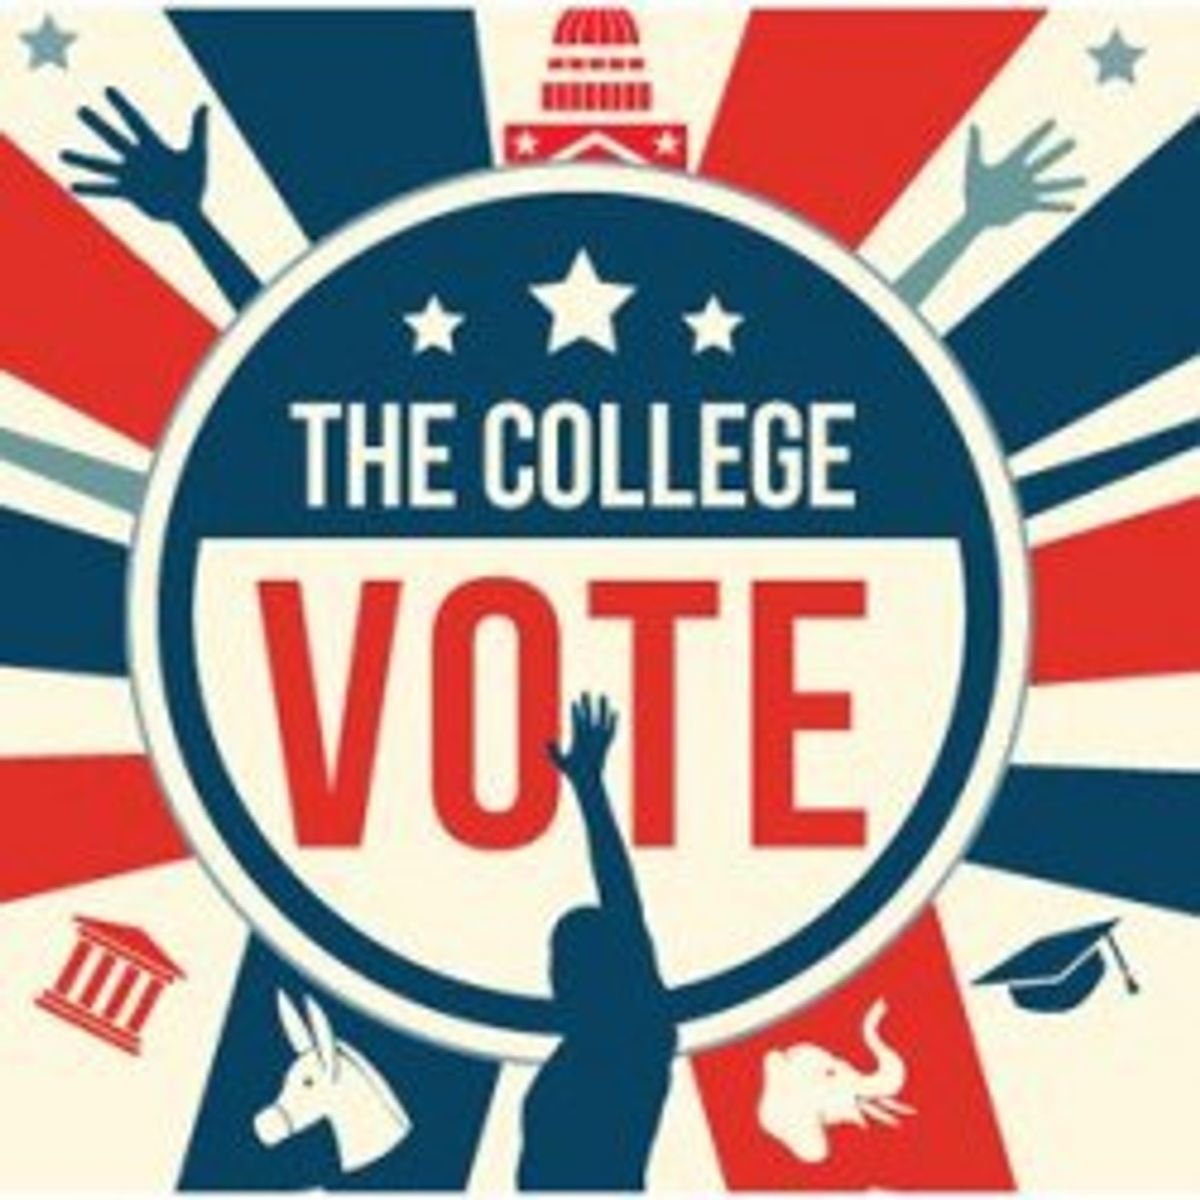 All College Students Need To Vote This November!